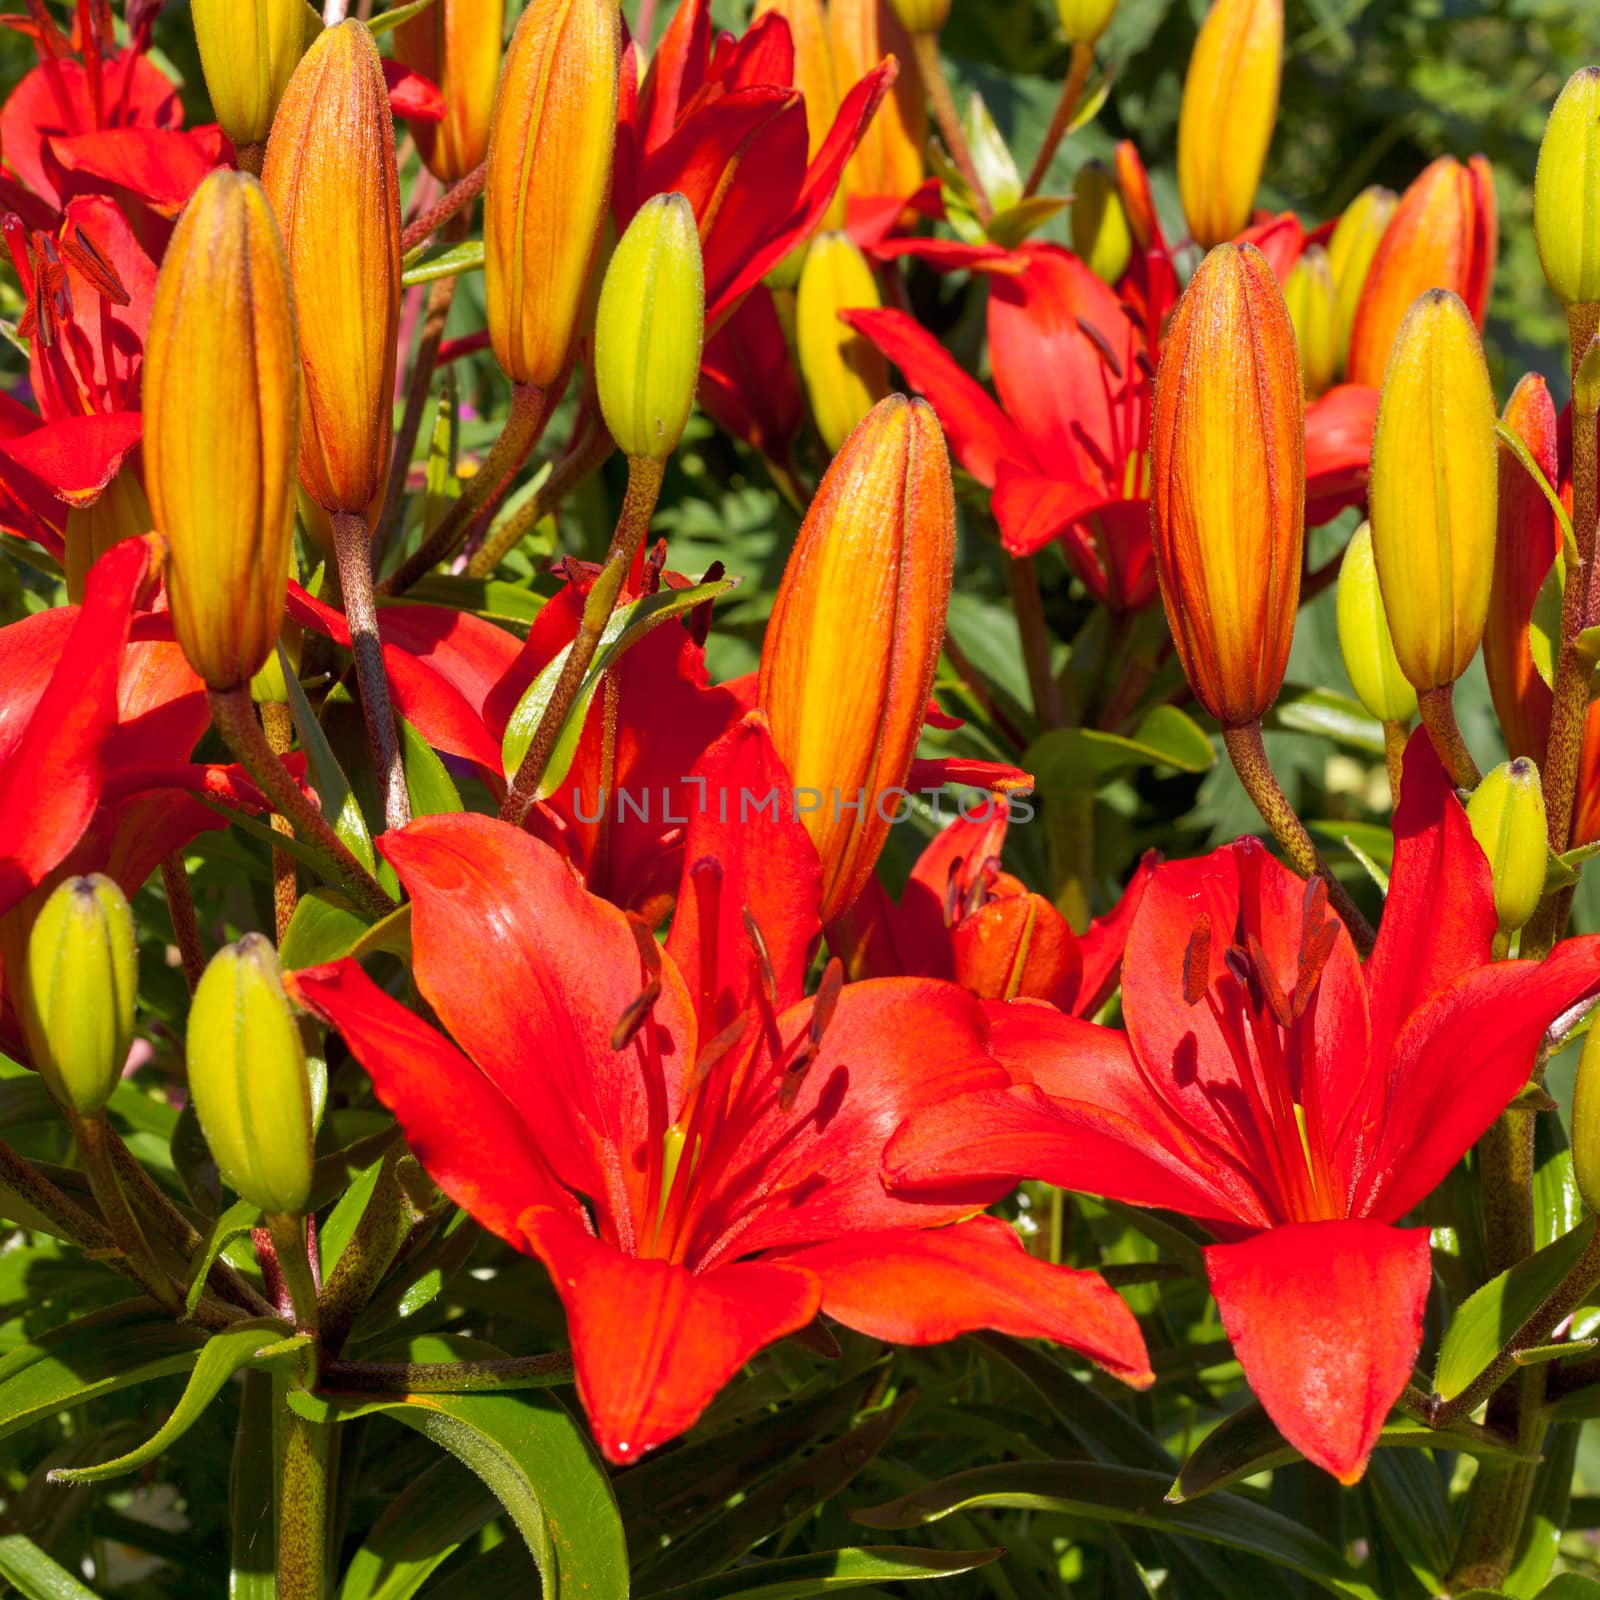 Bunch of red-orange blooming lily flowers Lilium sp. close-up in garden bed.